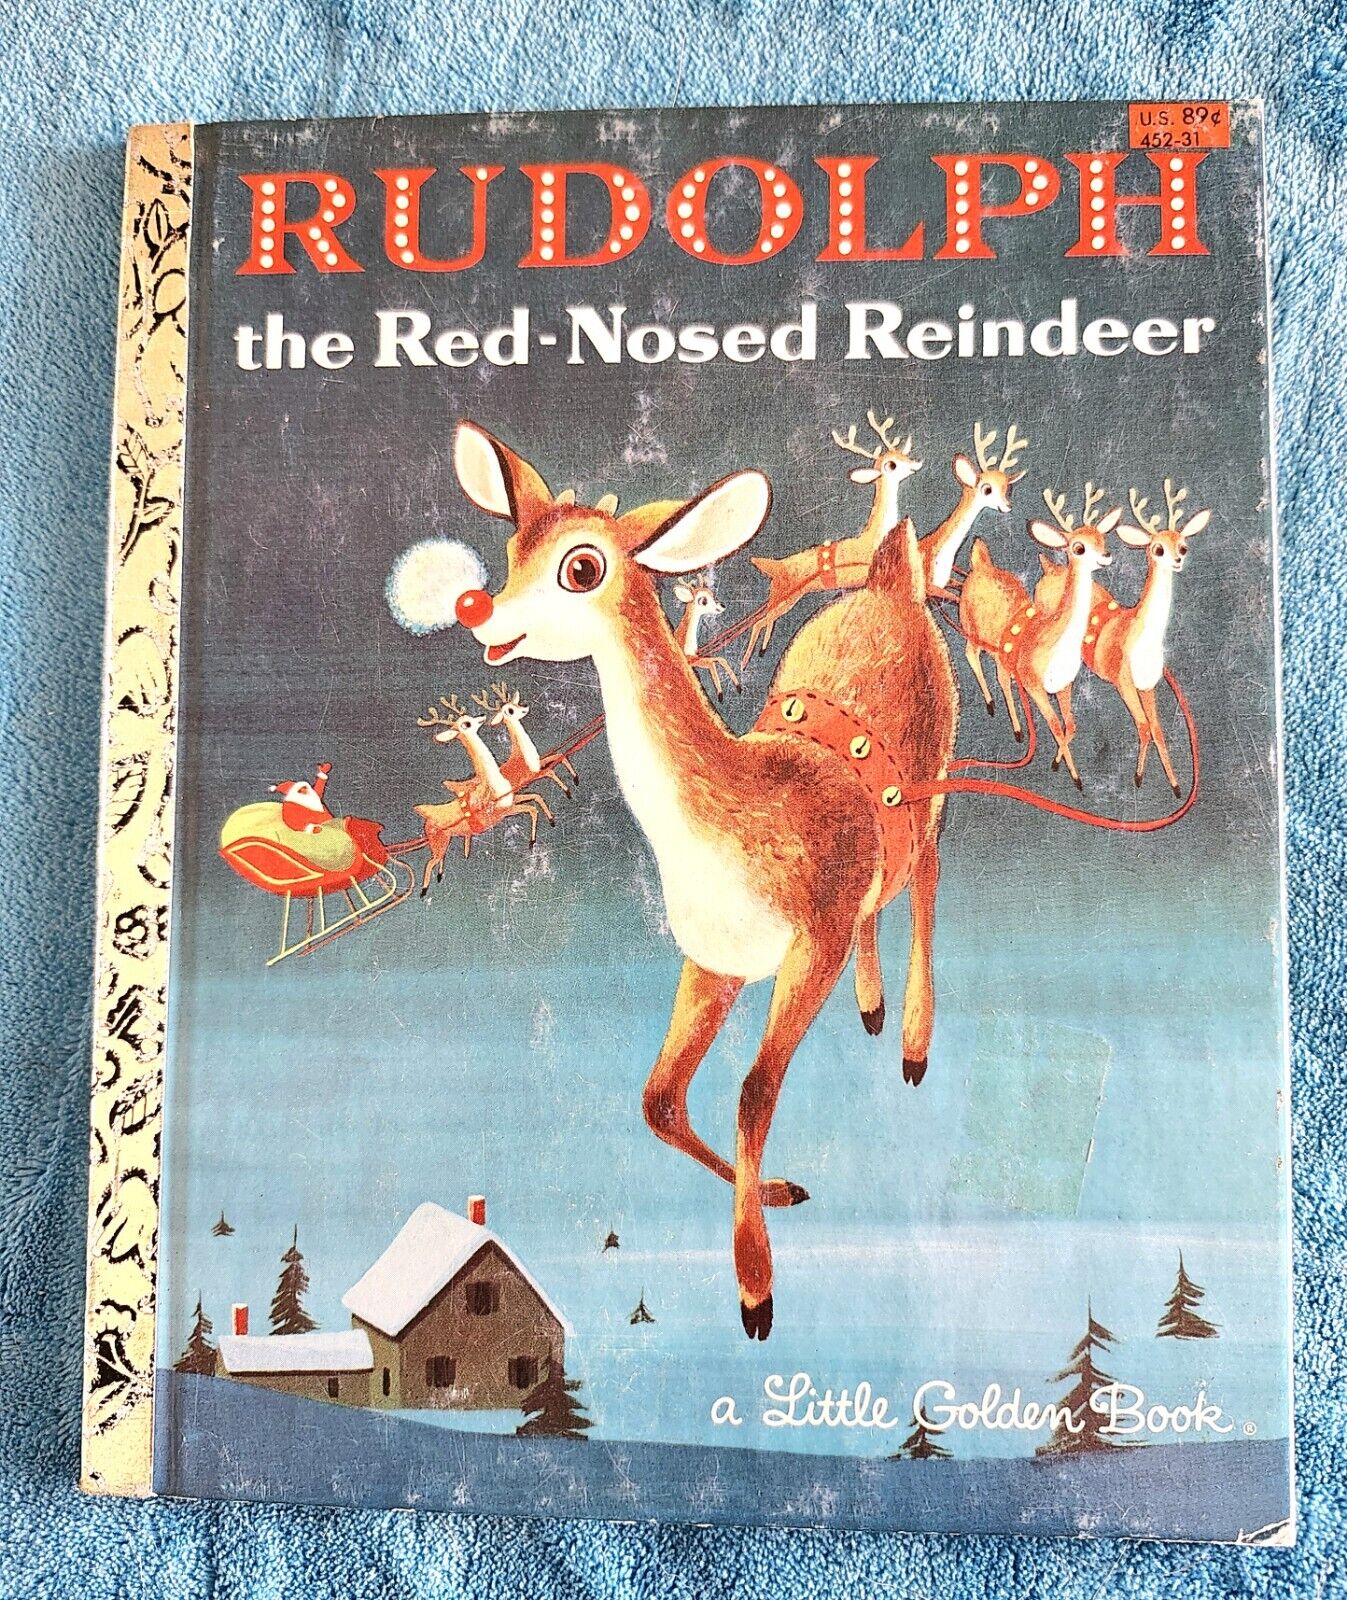 Vintage Rudolph The Red Nosed Reindeer 1949 Copyright 